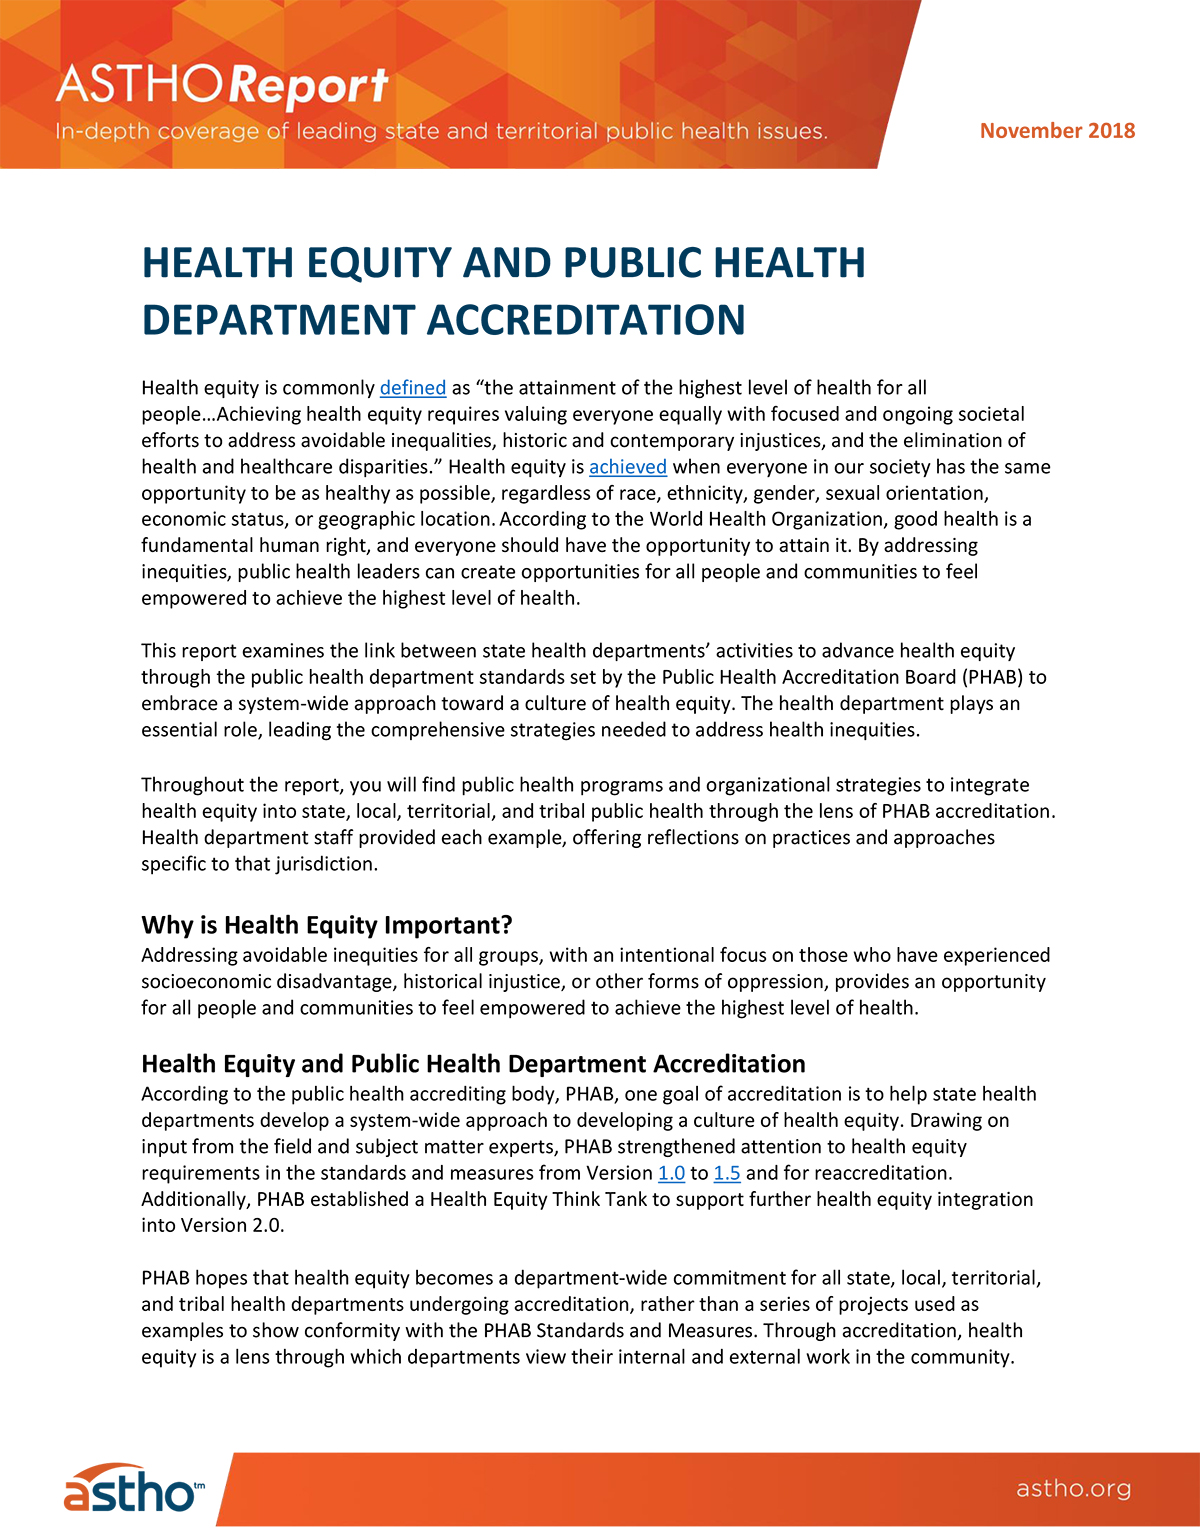 Health Equity and Public Health Department Accreditation